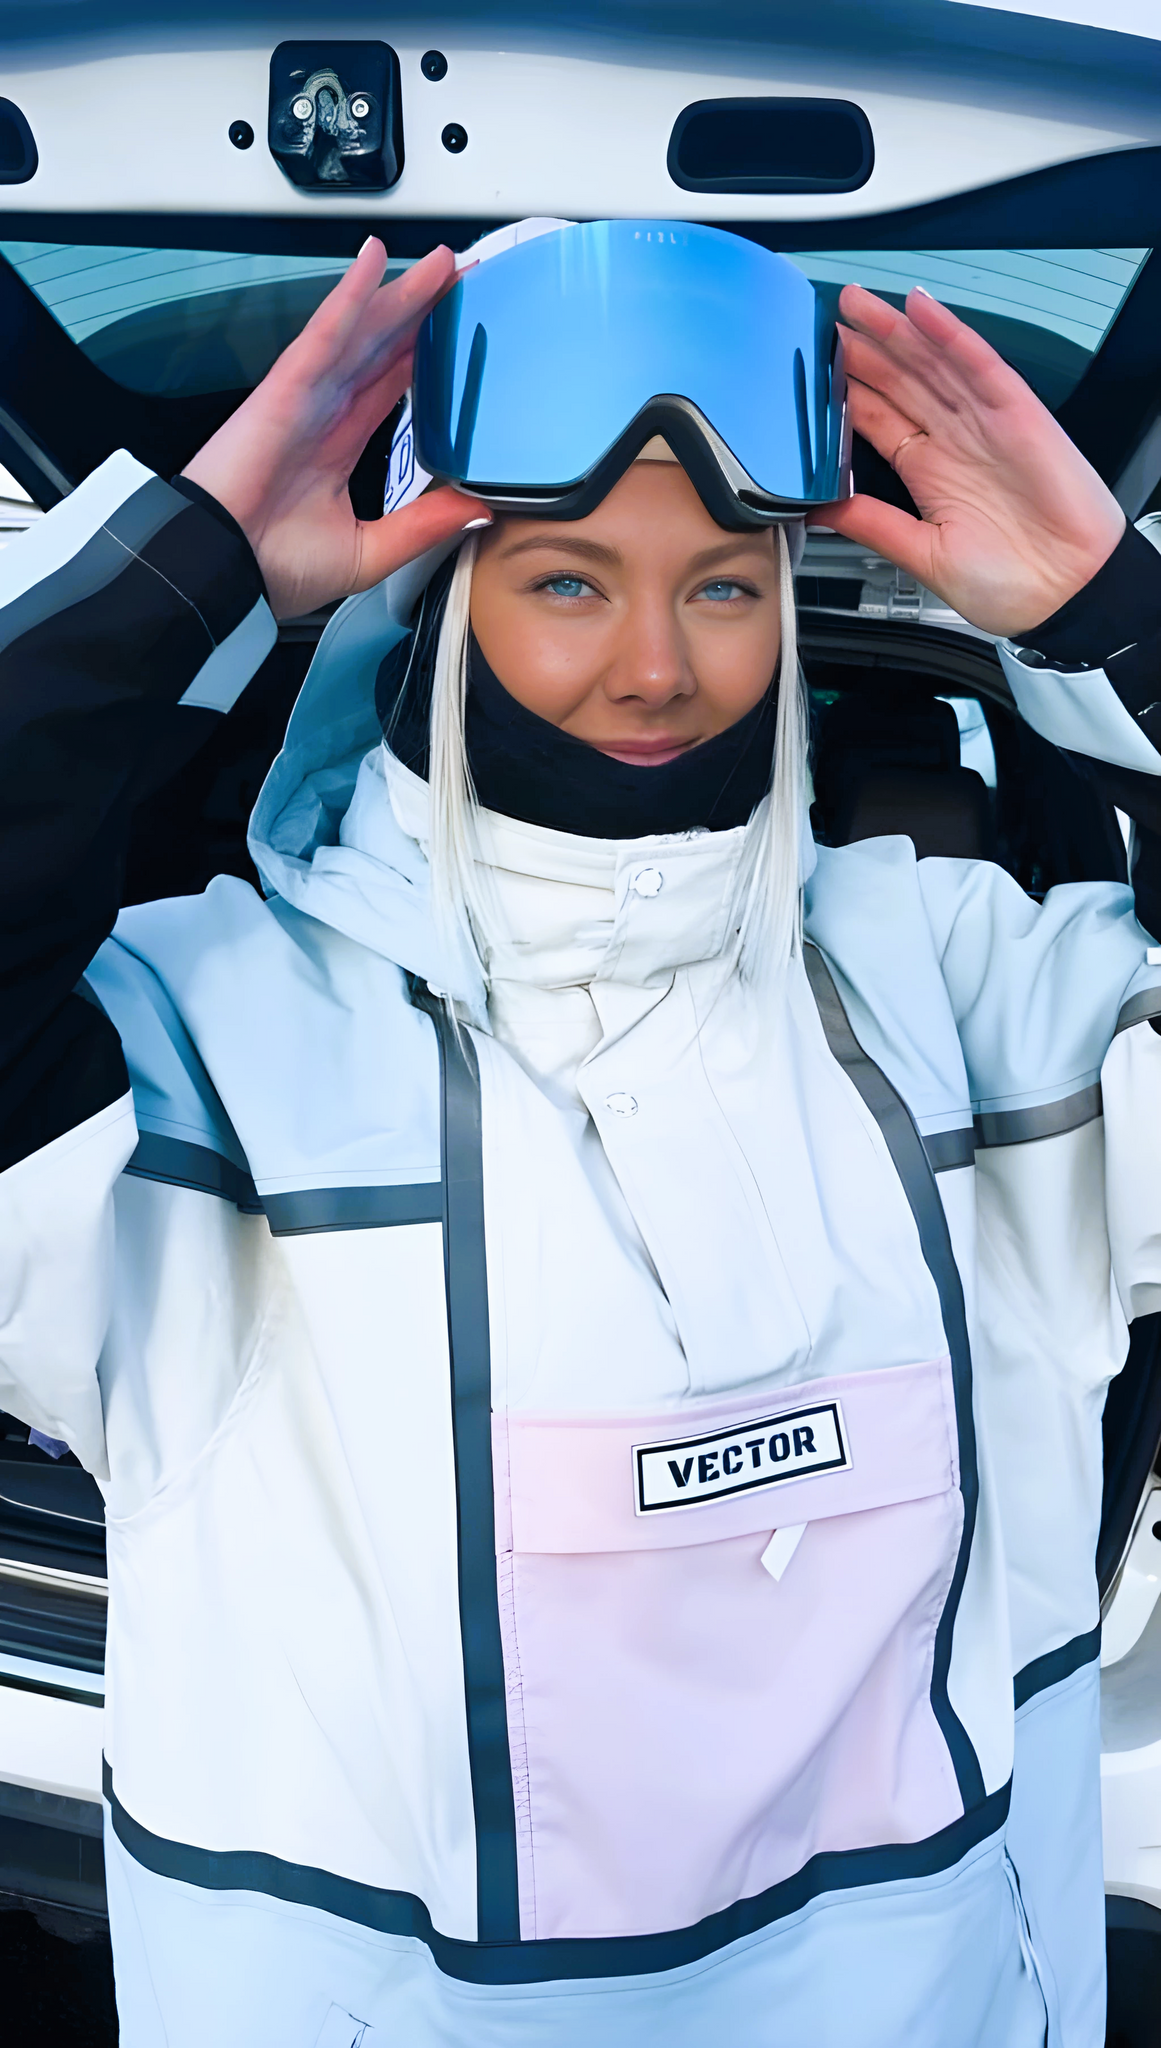 ASHLEIGH SEARLE‘s Snowboarding Picture with VECTOR